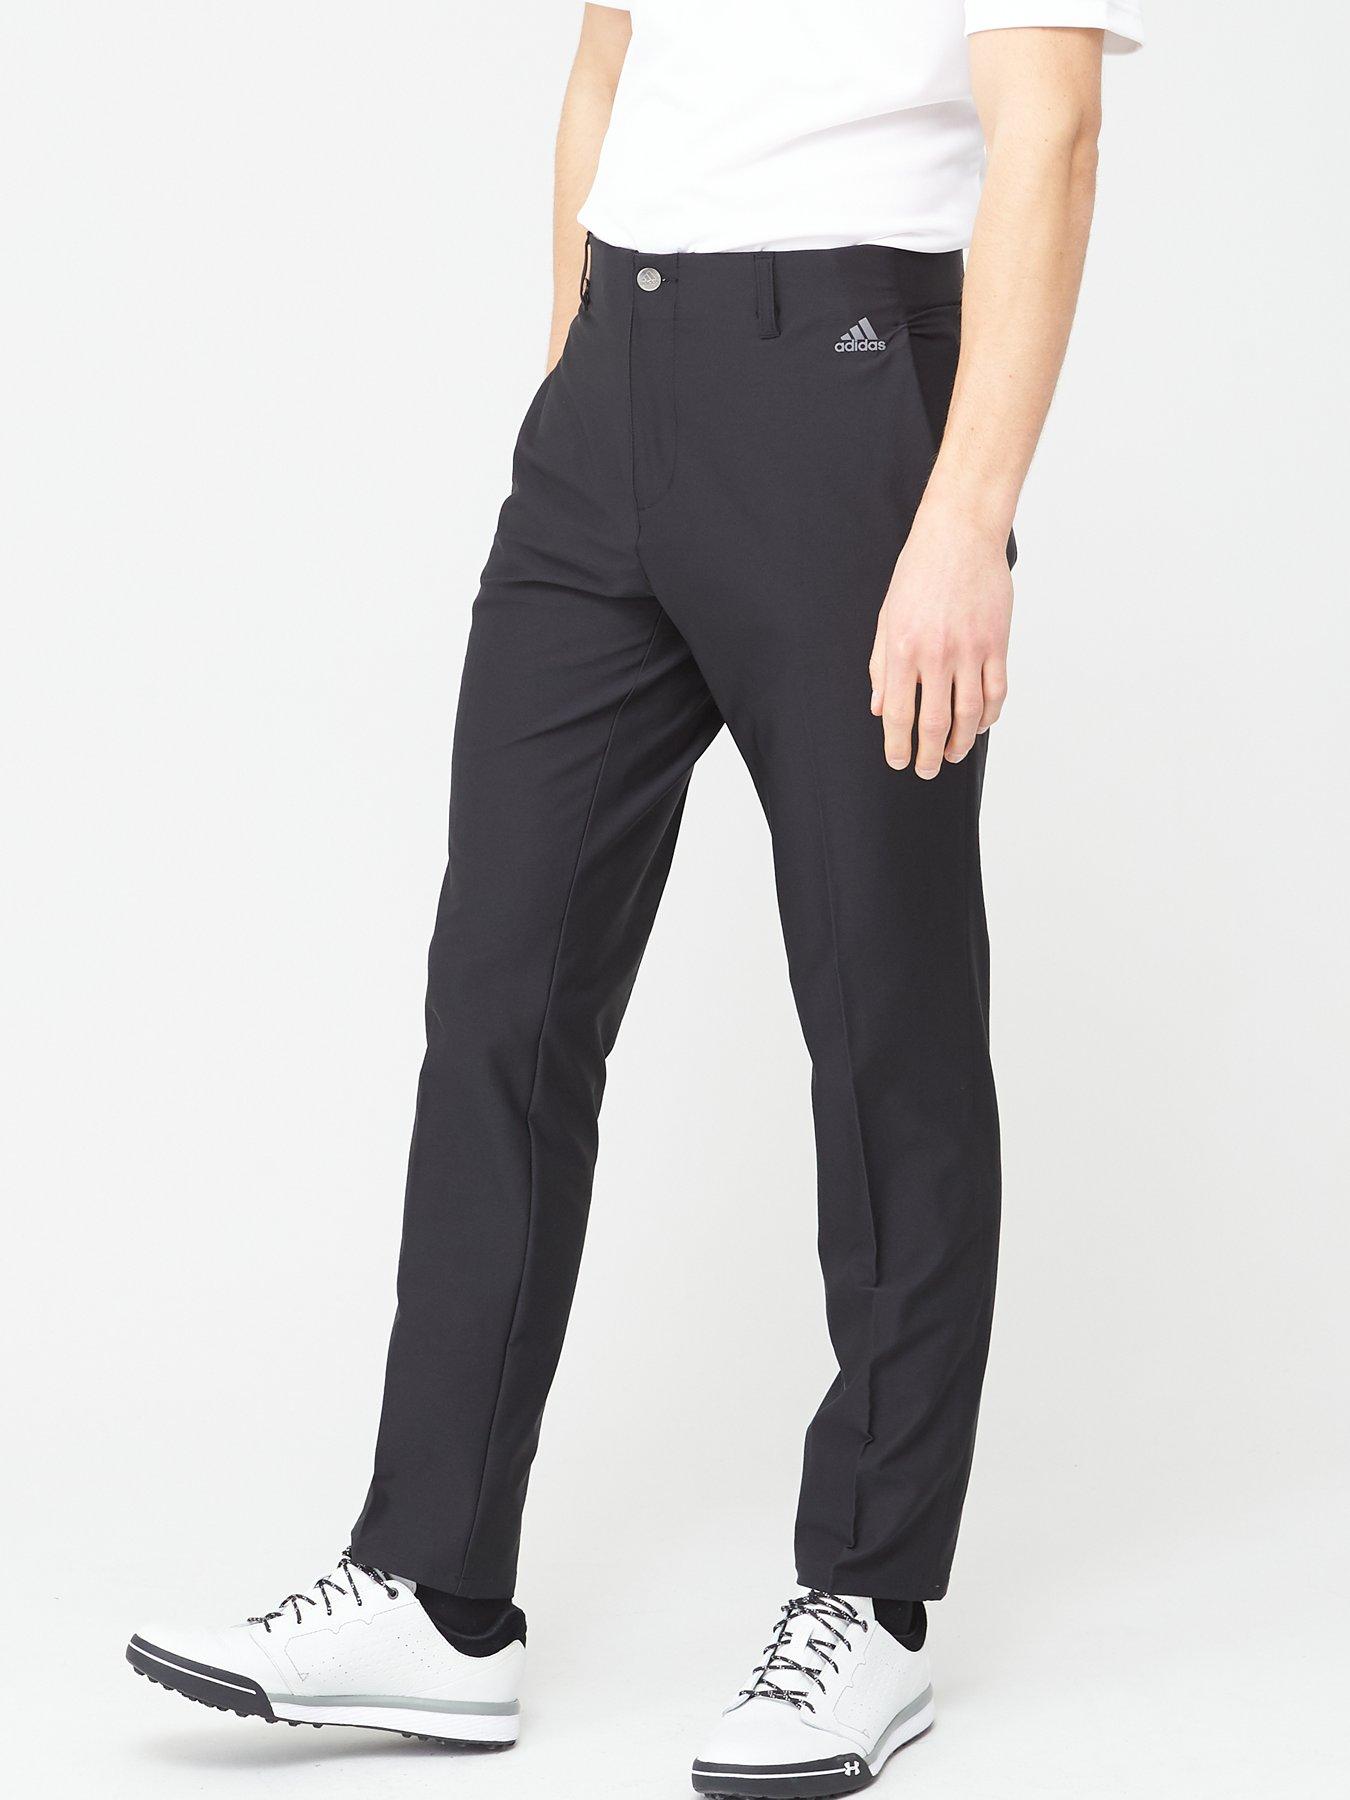 adidas ultimate365 tapered pants